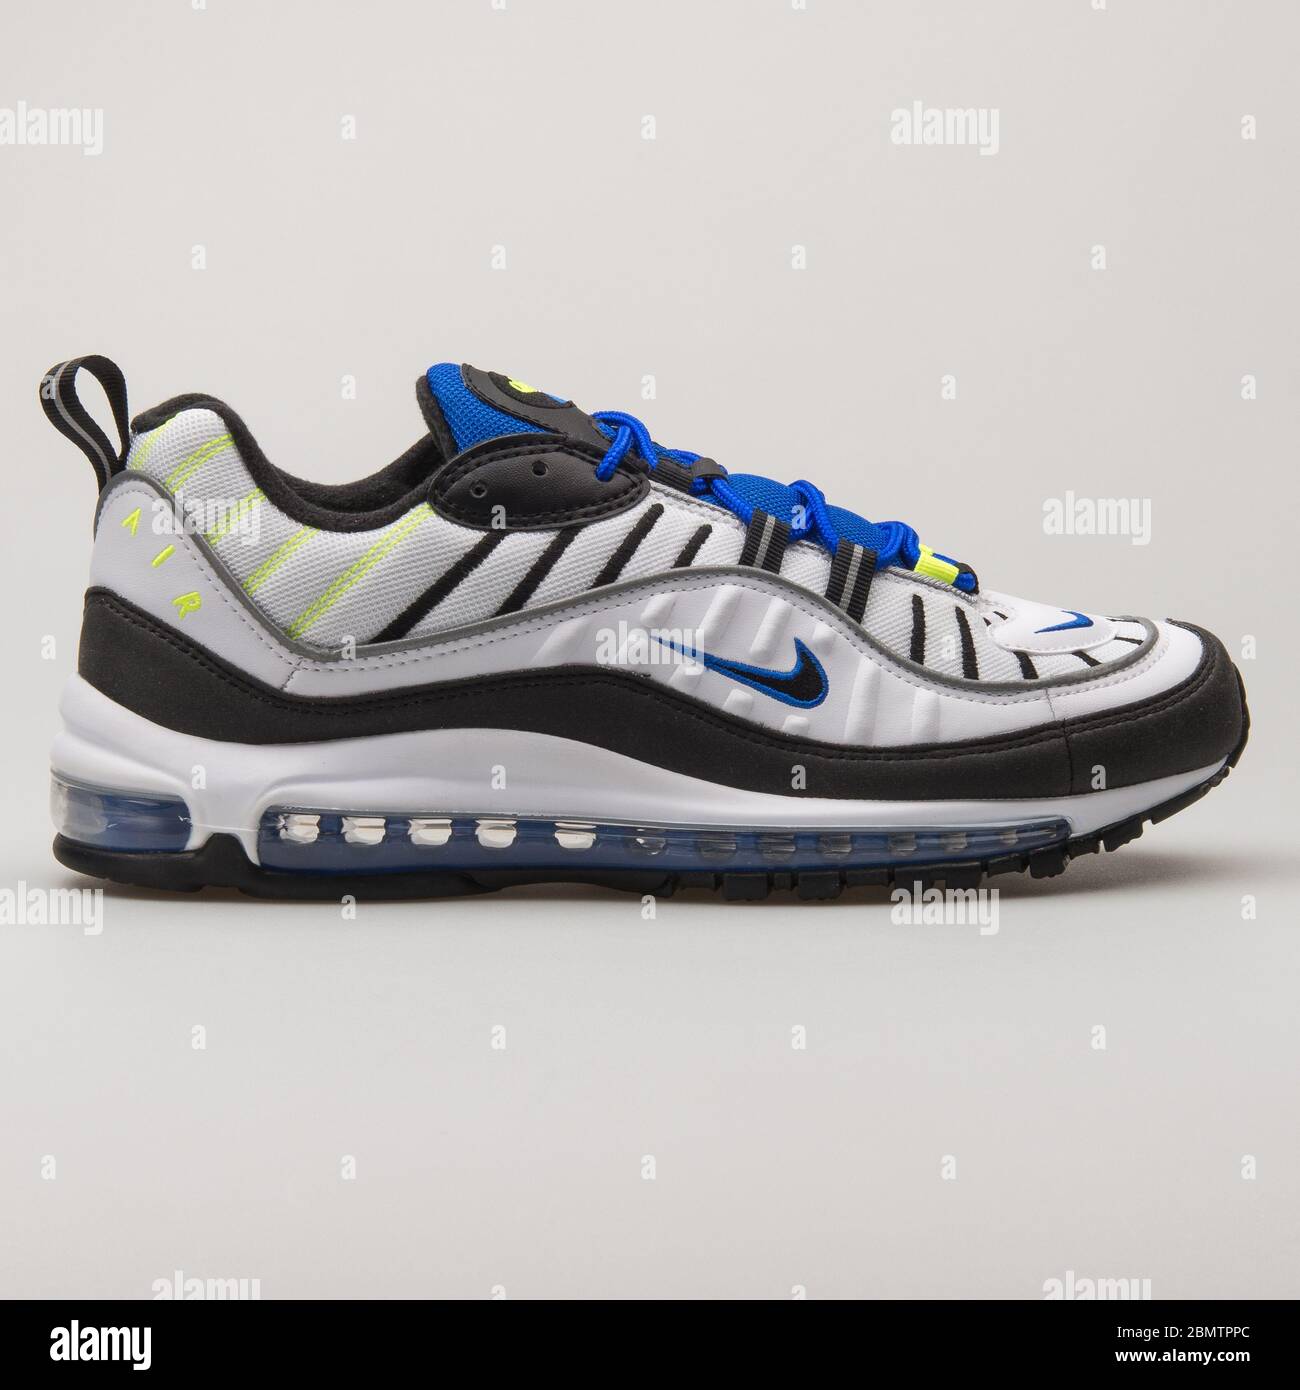 Nike air max 98 High Resolution Stock Photography and Images - Alamy